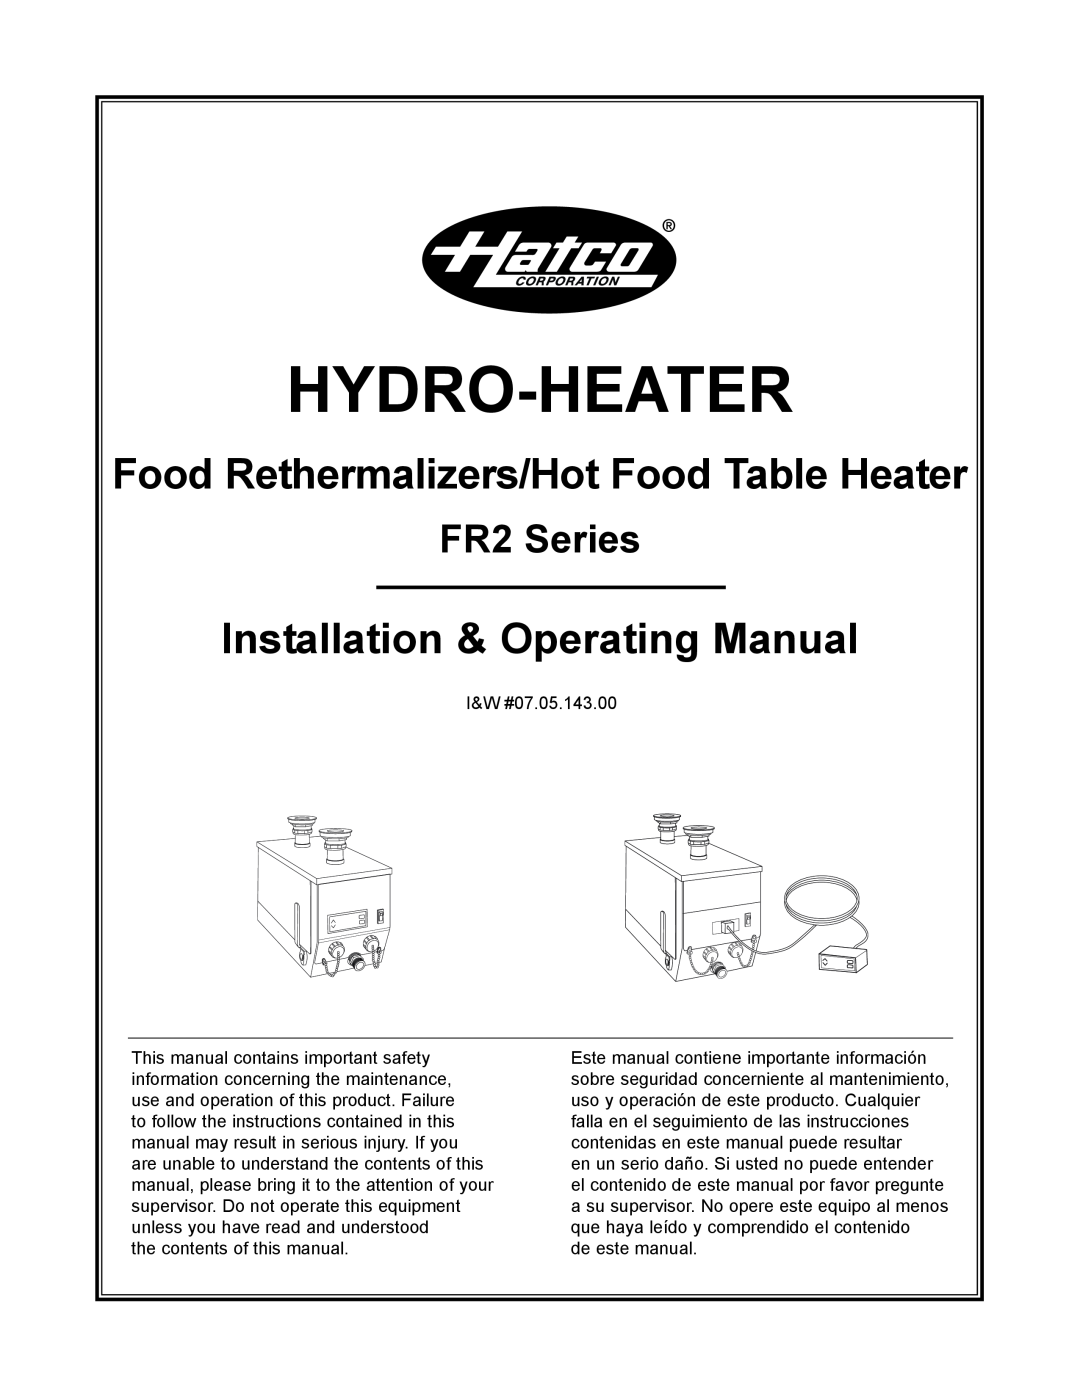 Hatco FR2 Series manual Hydro-Heater, Food Rethermalizers/Hot Food Table Heater, Installation & Operating Manual 